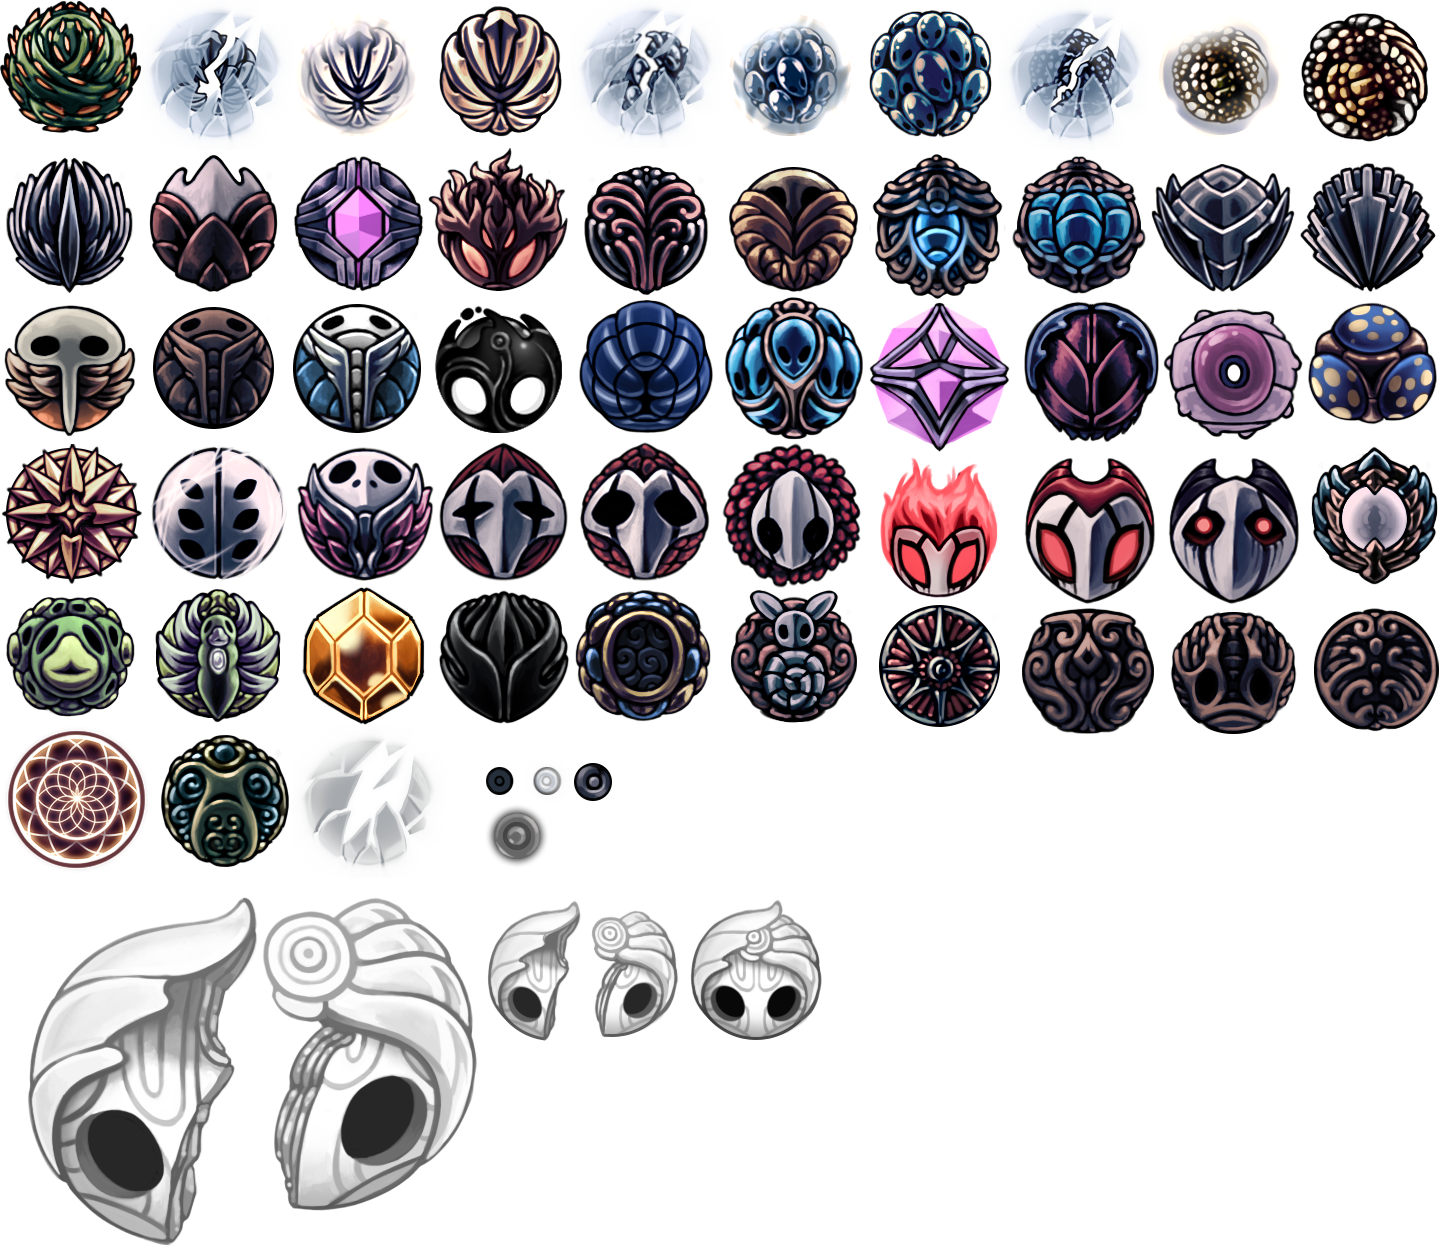 all charms hollow knight